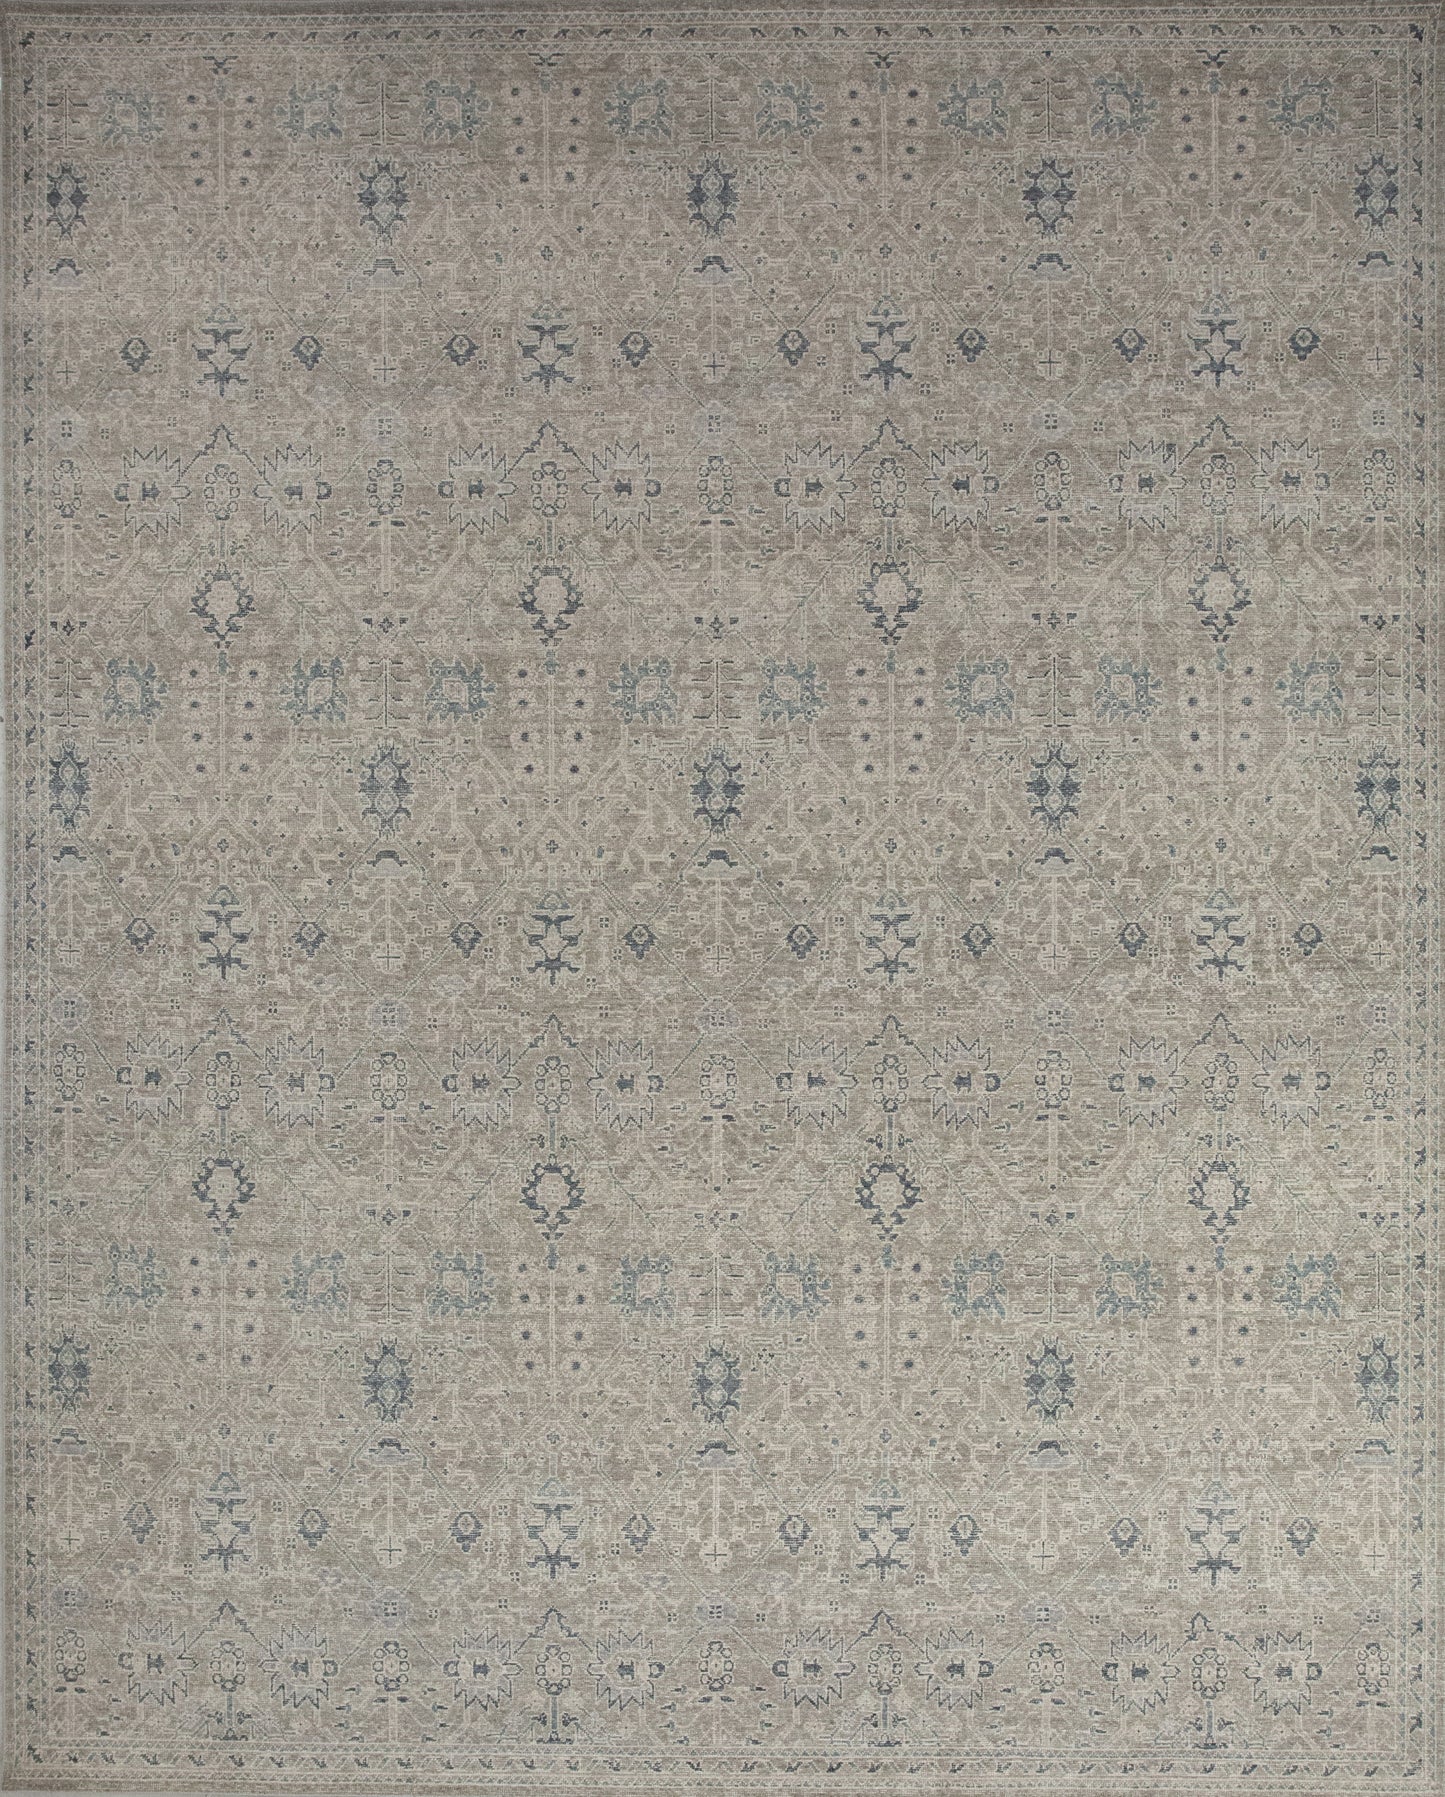 Vintage rug comes with a tranquil color scheme which has variations of beige and gray accents.